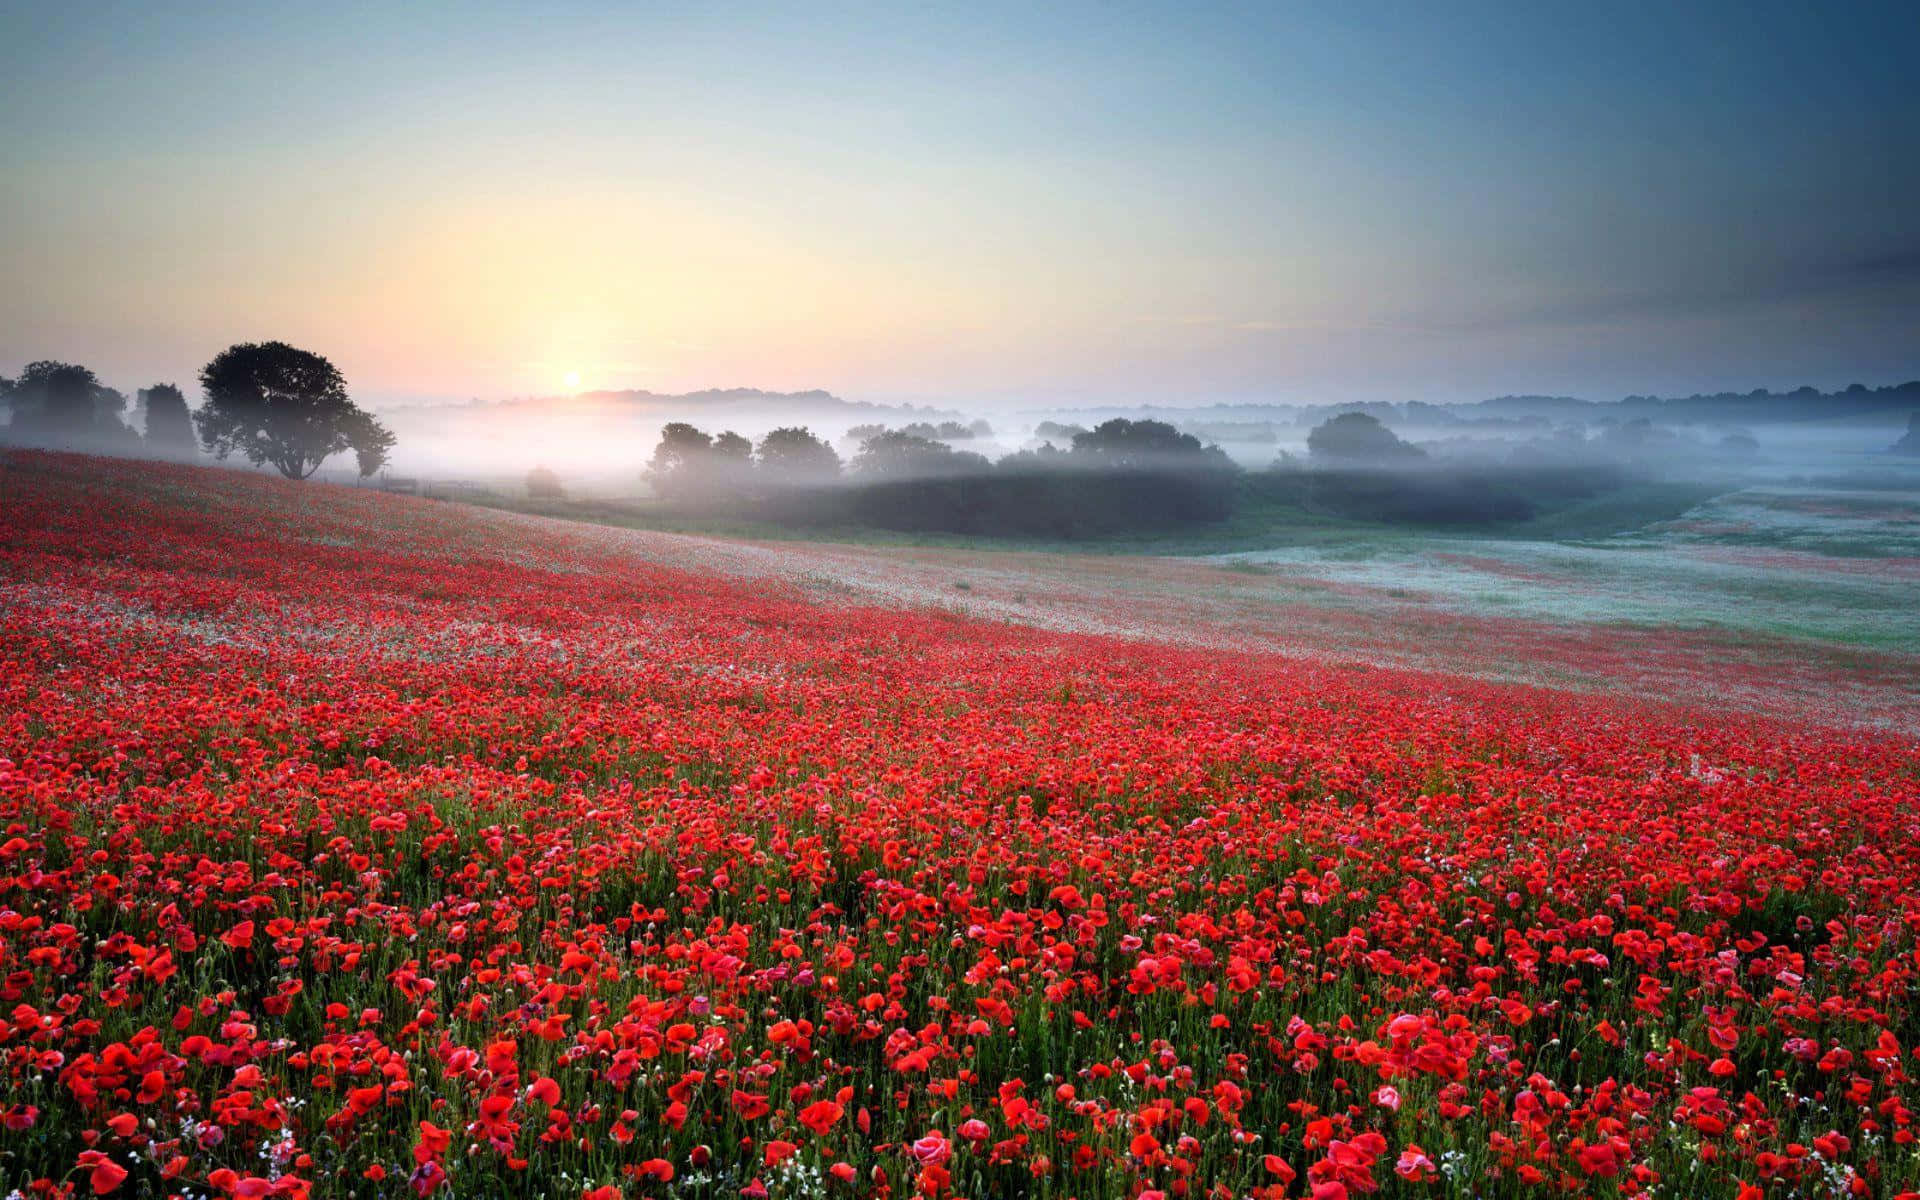 A Field Of Red Flowers With Fog In The Background